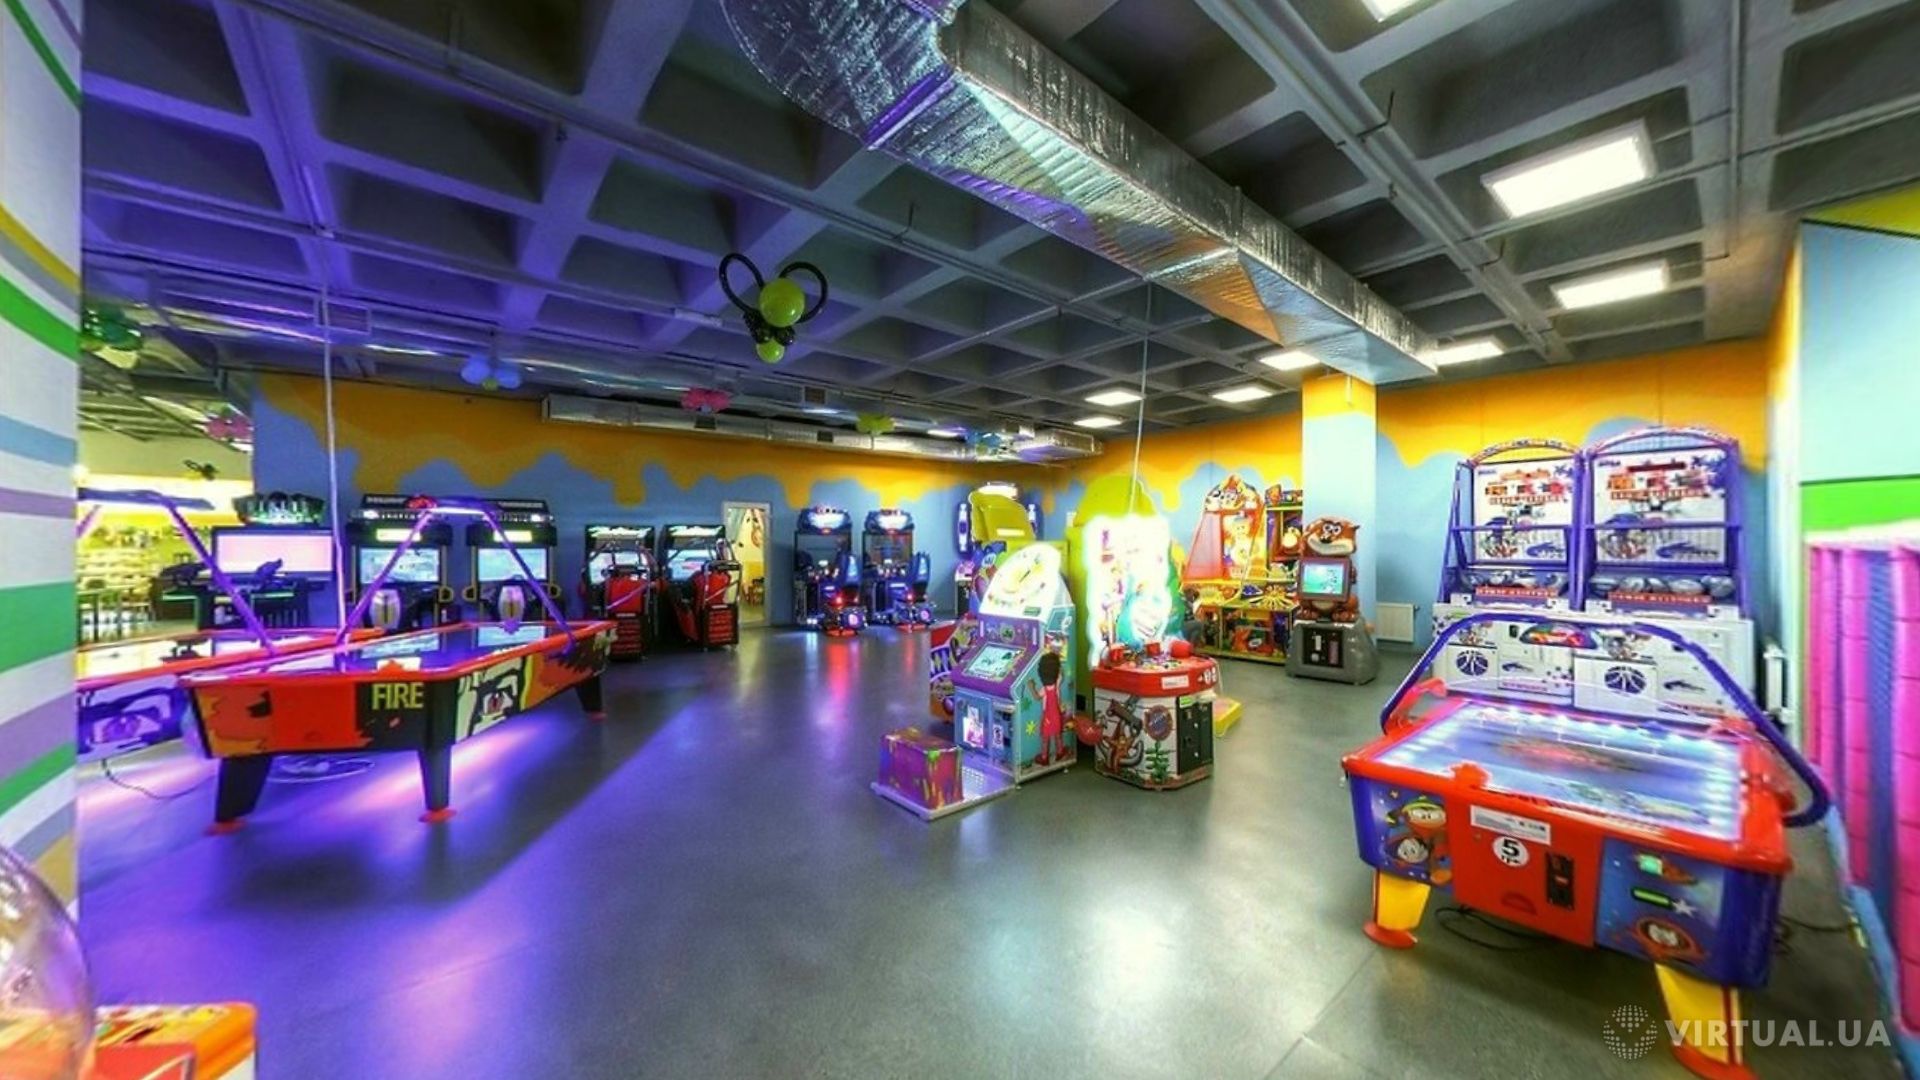 Entartainment and games center Veseluj Vulyk